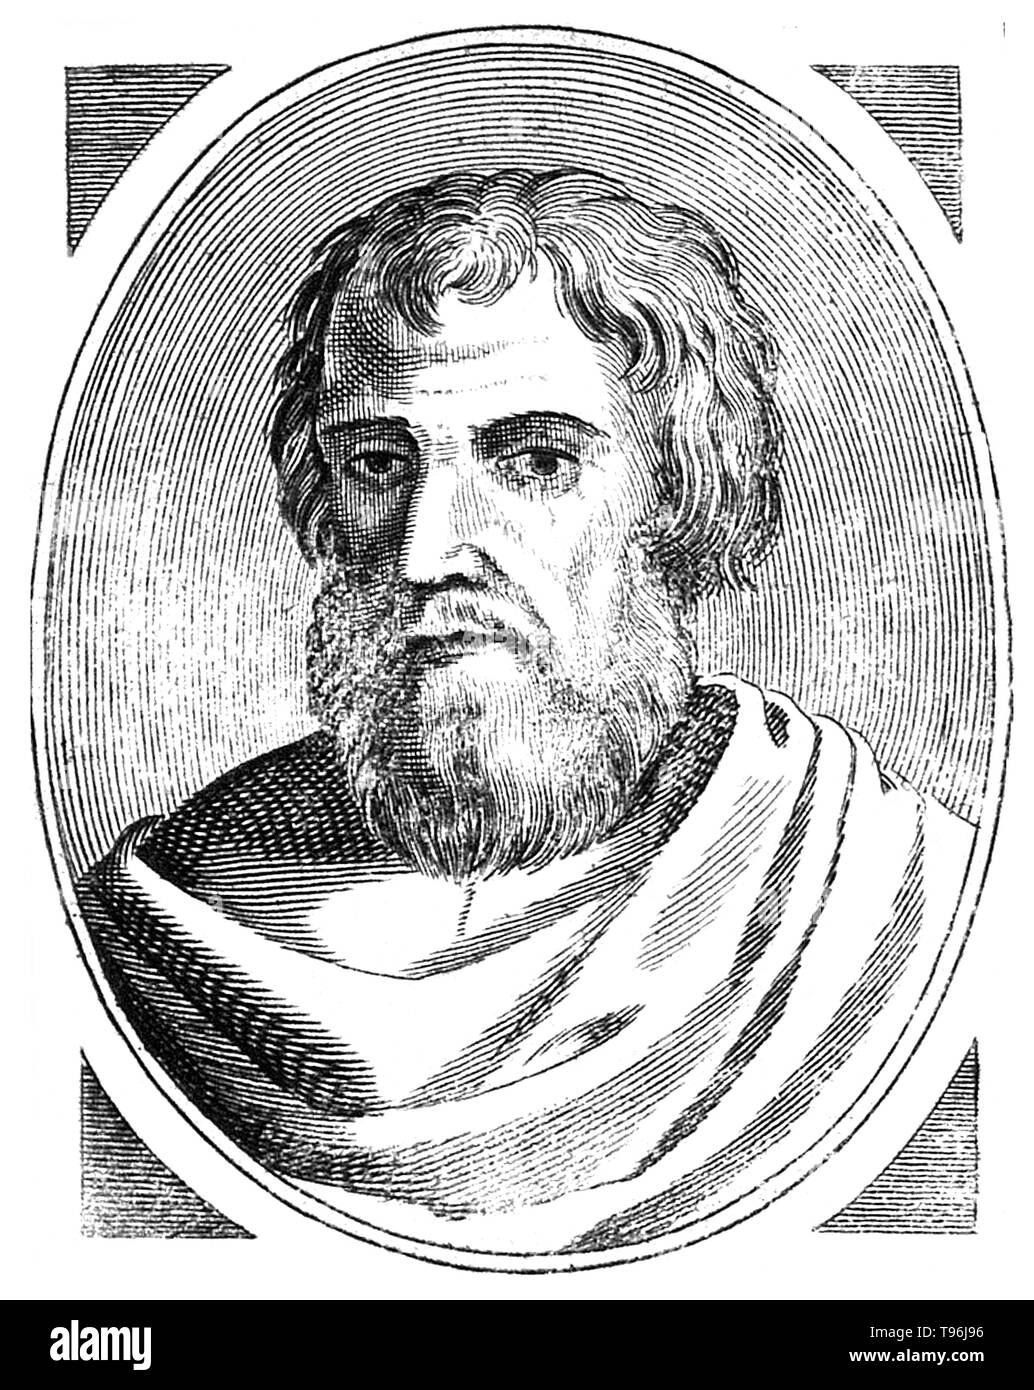 Arnaldus de Villa Nova (1235-1311) was a Spanish alchemist, astrologer and physician. He studied chemistry, medicine, physics, and Arabic philosophy. He is credited with translating a number of medical texts from Arabic, including works by Ibn Sina (Avicenna), Qusta ibn Luqa (Costa ben Luca), and Galen. Many alchemical writings, including Thesaurus Thesaurorum or Rosarius Philosophorum, Novum Lumen, and Flos Florum, are also ascribed to him, but they are of very doubtful authenticity. Stock Photo